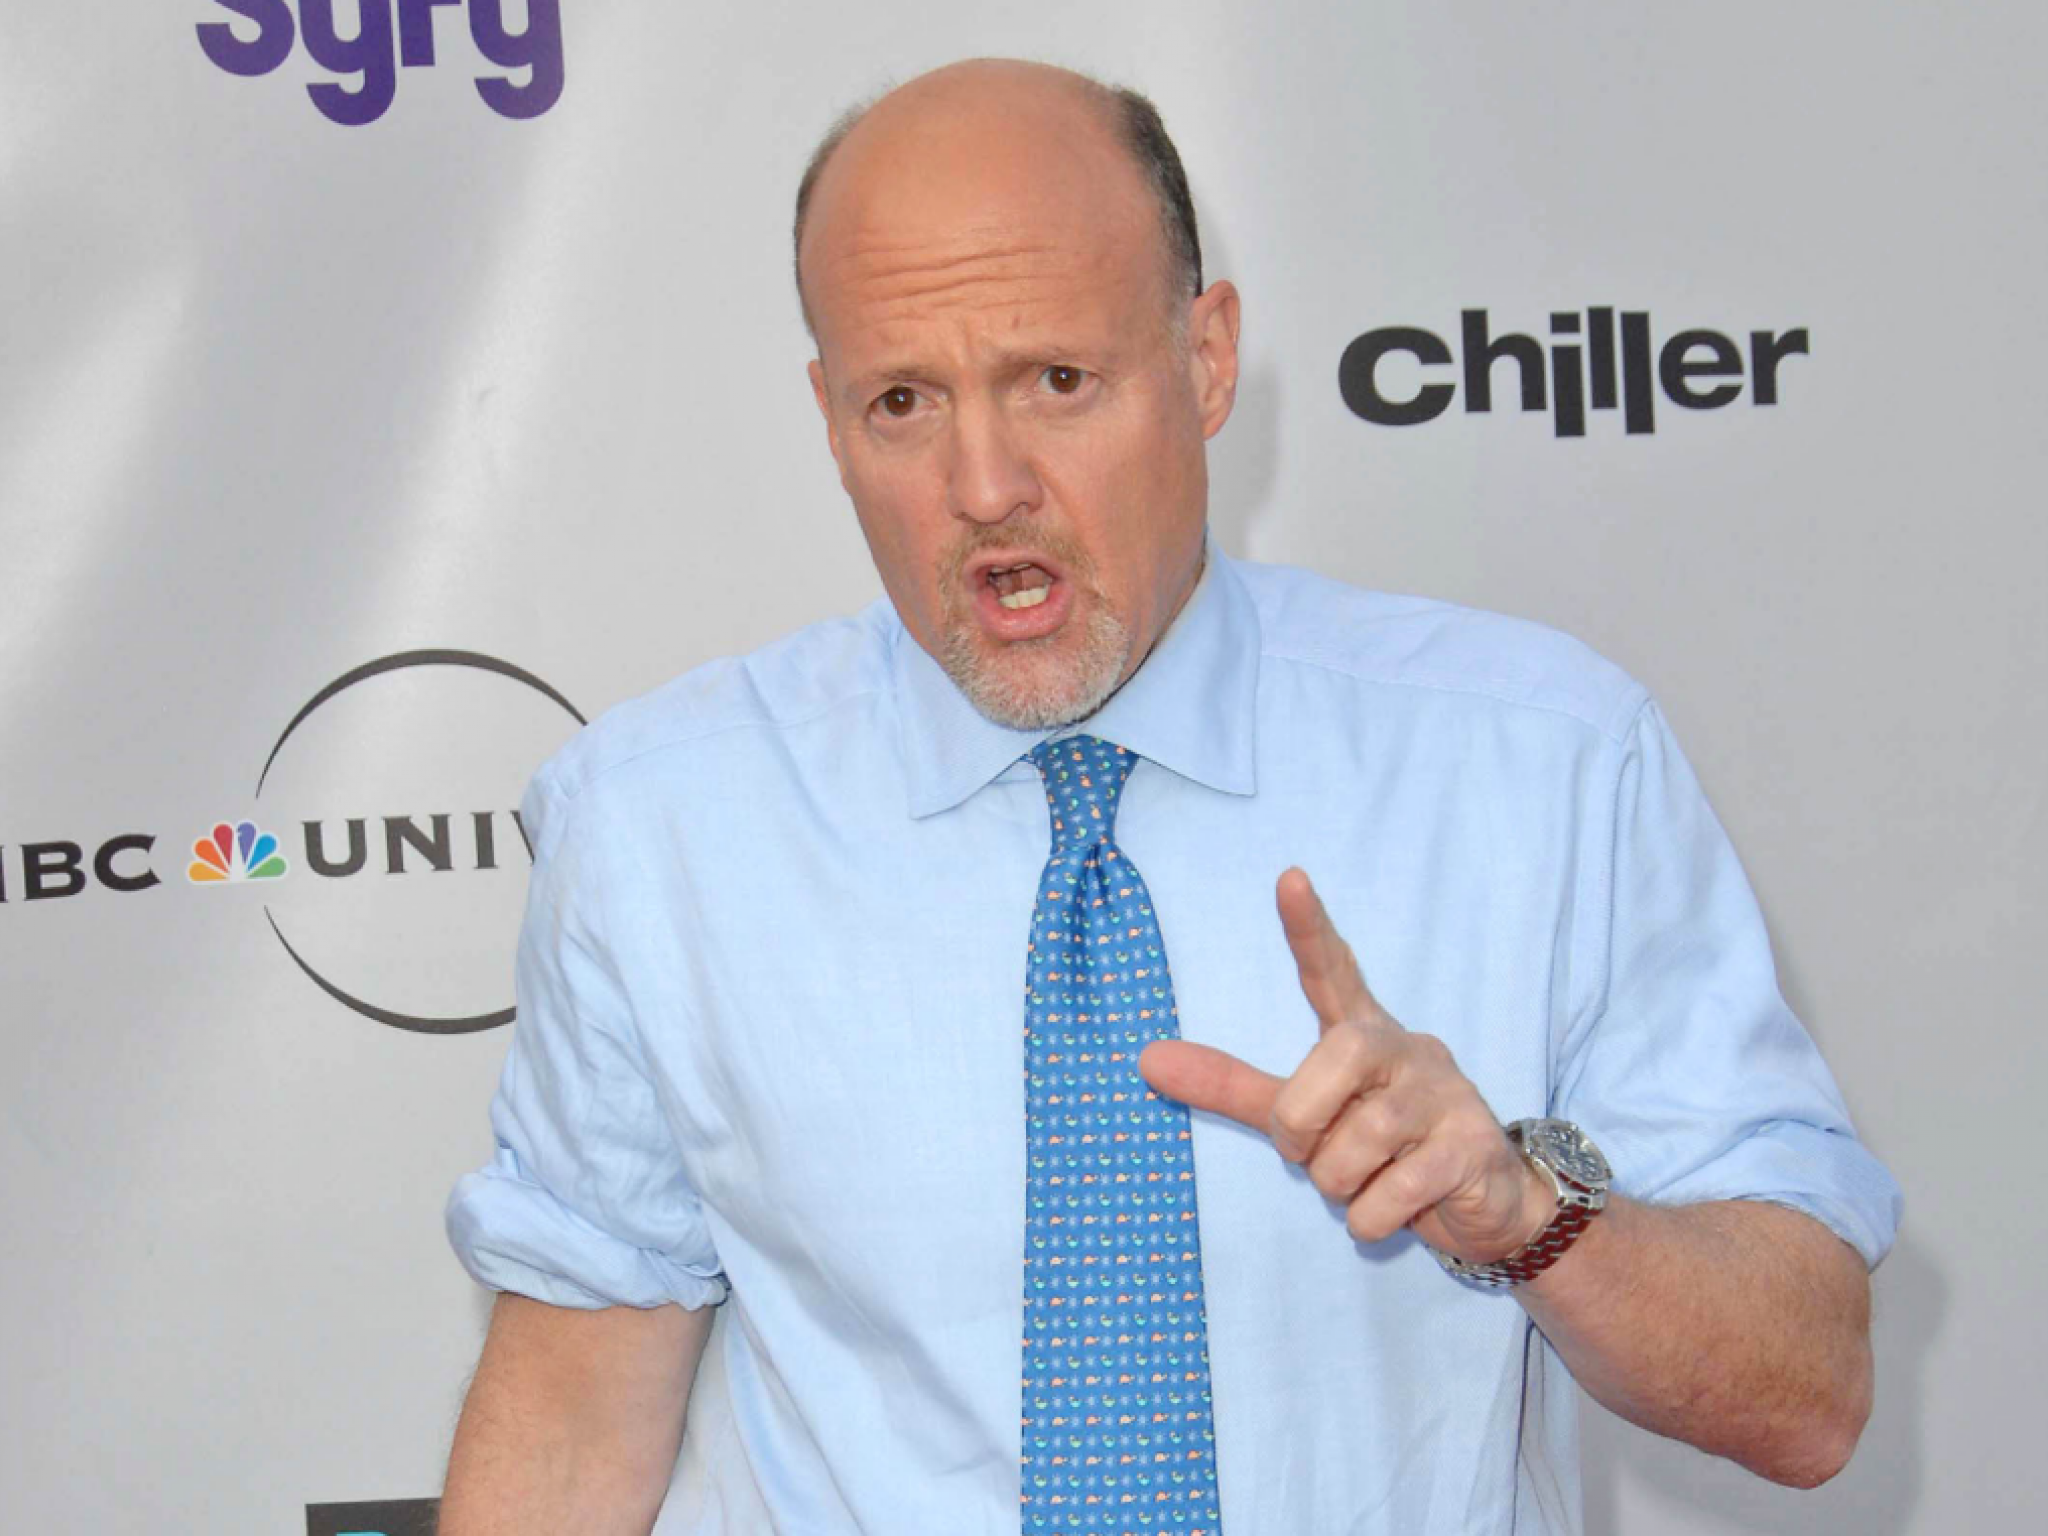 Jim Cramer Says ‘There Are Hundreds Of Articles’ About Apple Losing Top Spot In China: ‘Google And Microsoft Can Barely Buy An Inch Of Ink After Some Spectacular Quarters’